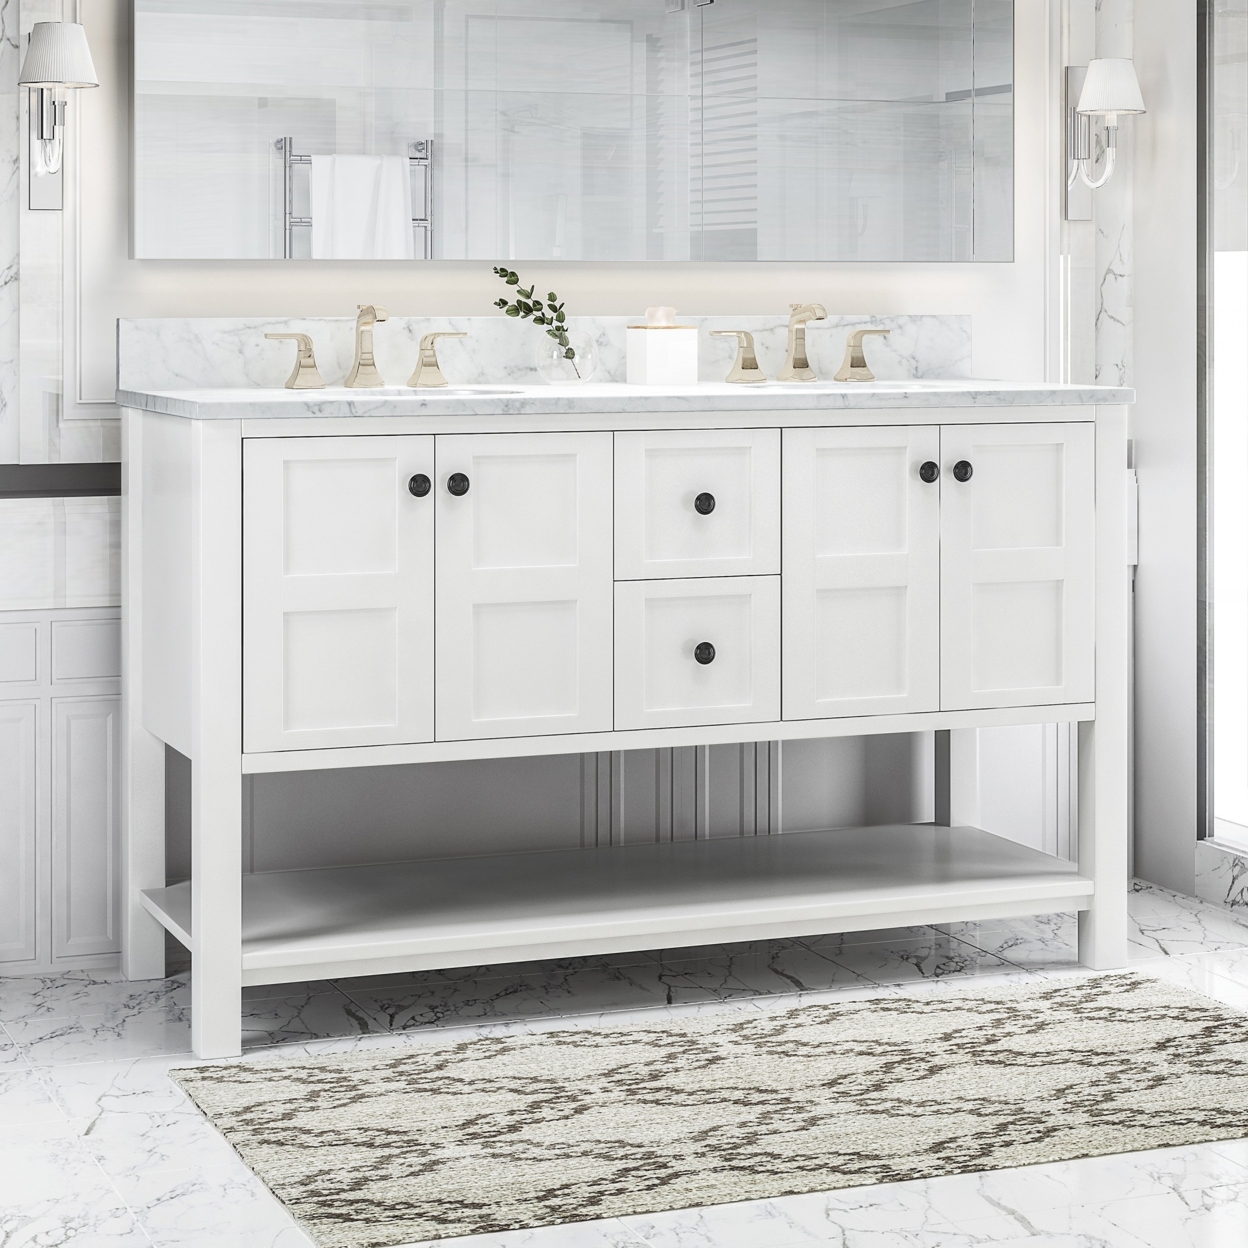 Jamison Contemporary 60 Wood Bathroom Vanity (Counter Top Not Included) - Gray